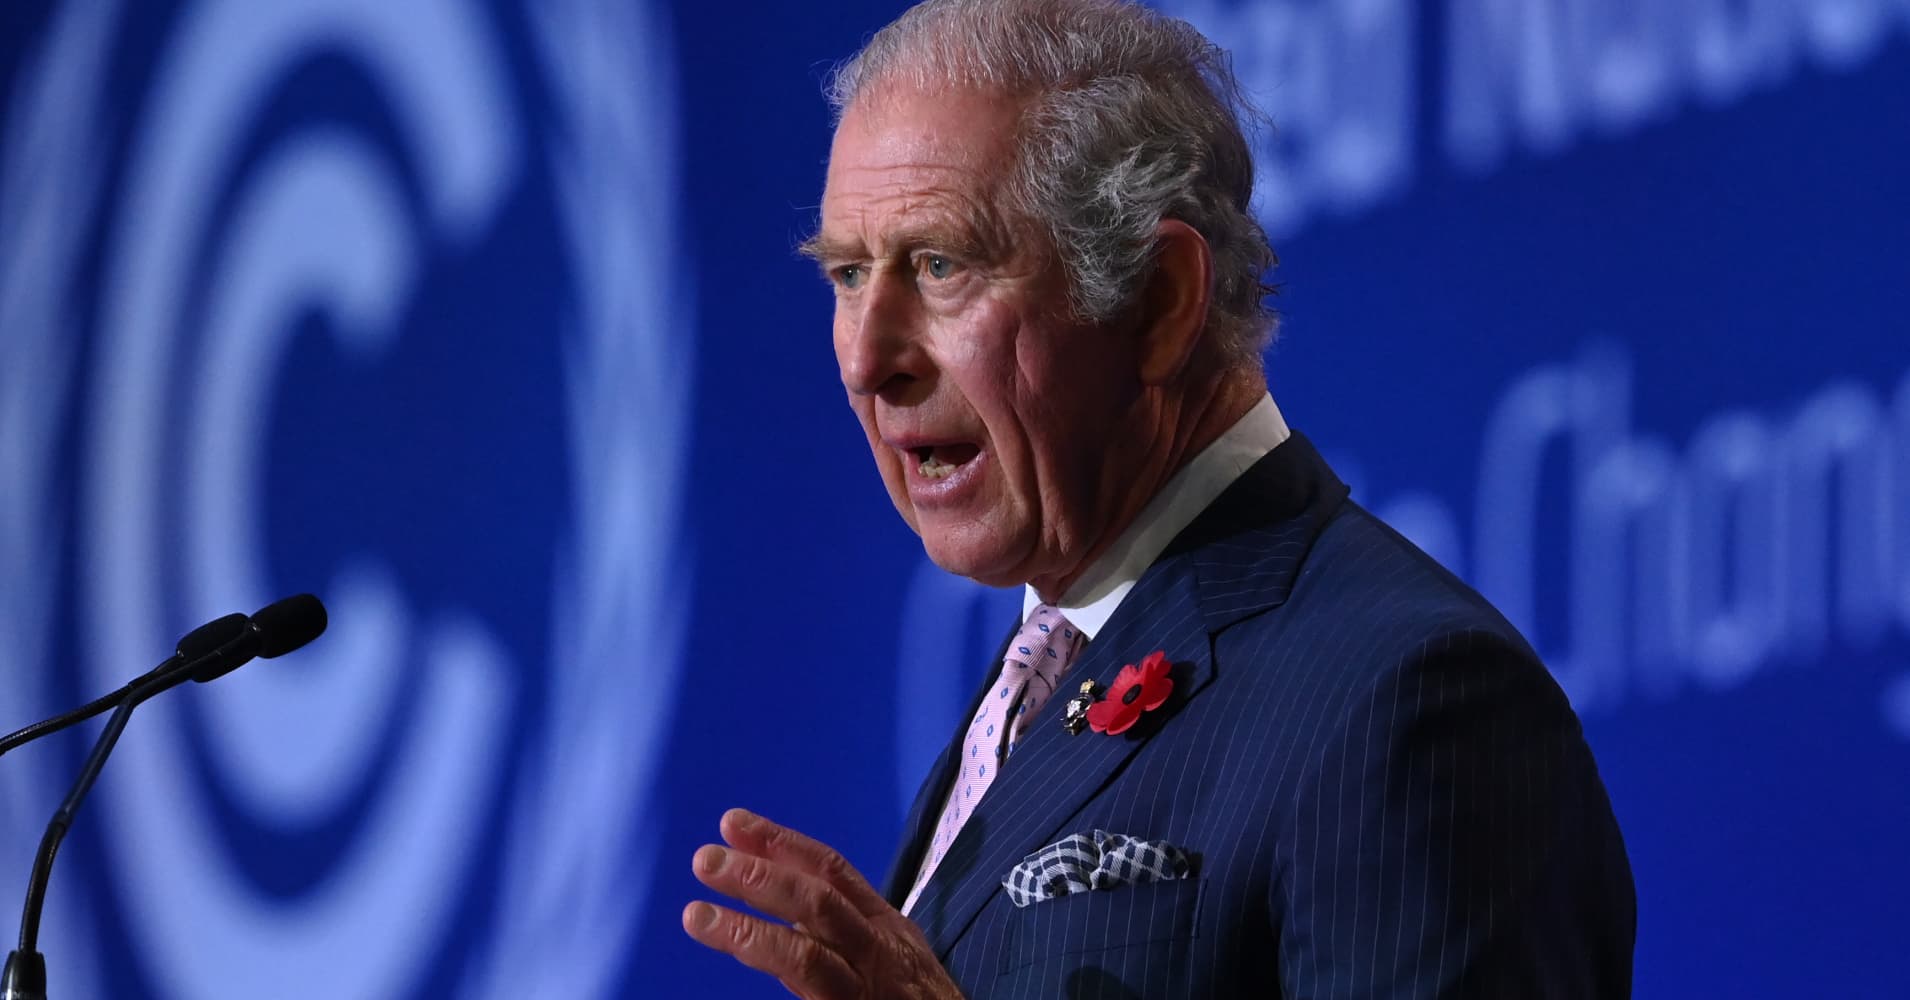 Prince Charles, Prince of Wales speaks during the opening ceremony of the UN Climate Change Conference COP26 at SECC on November 1, 2021 in Glasgow, United Kingdom.